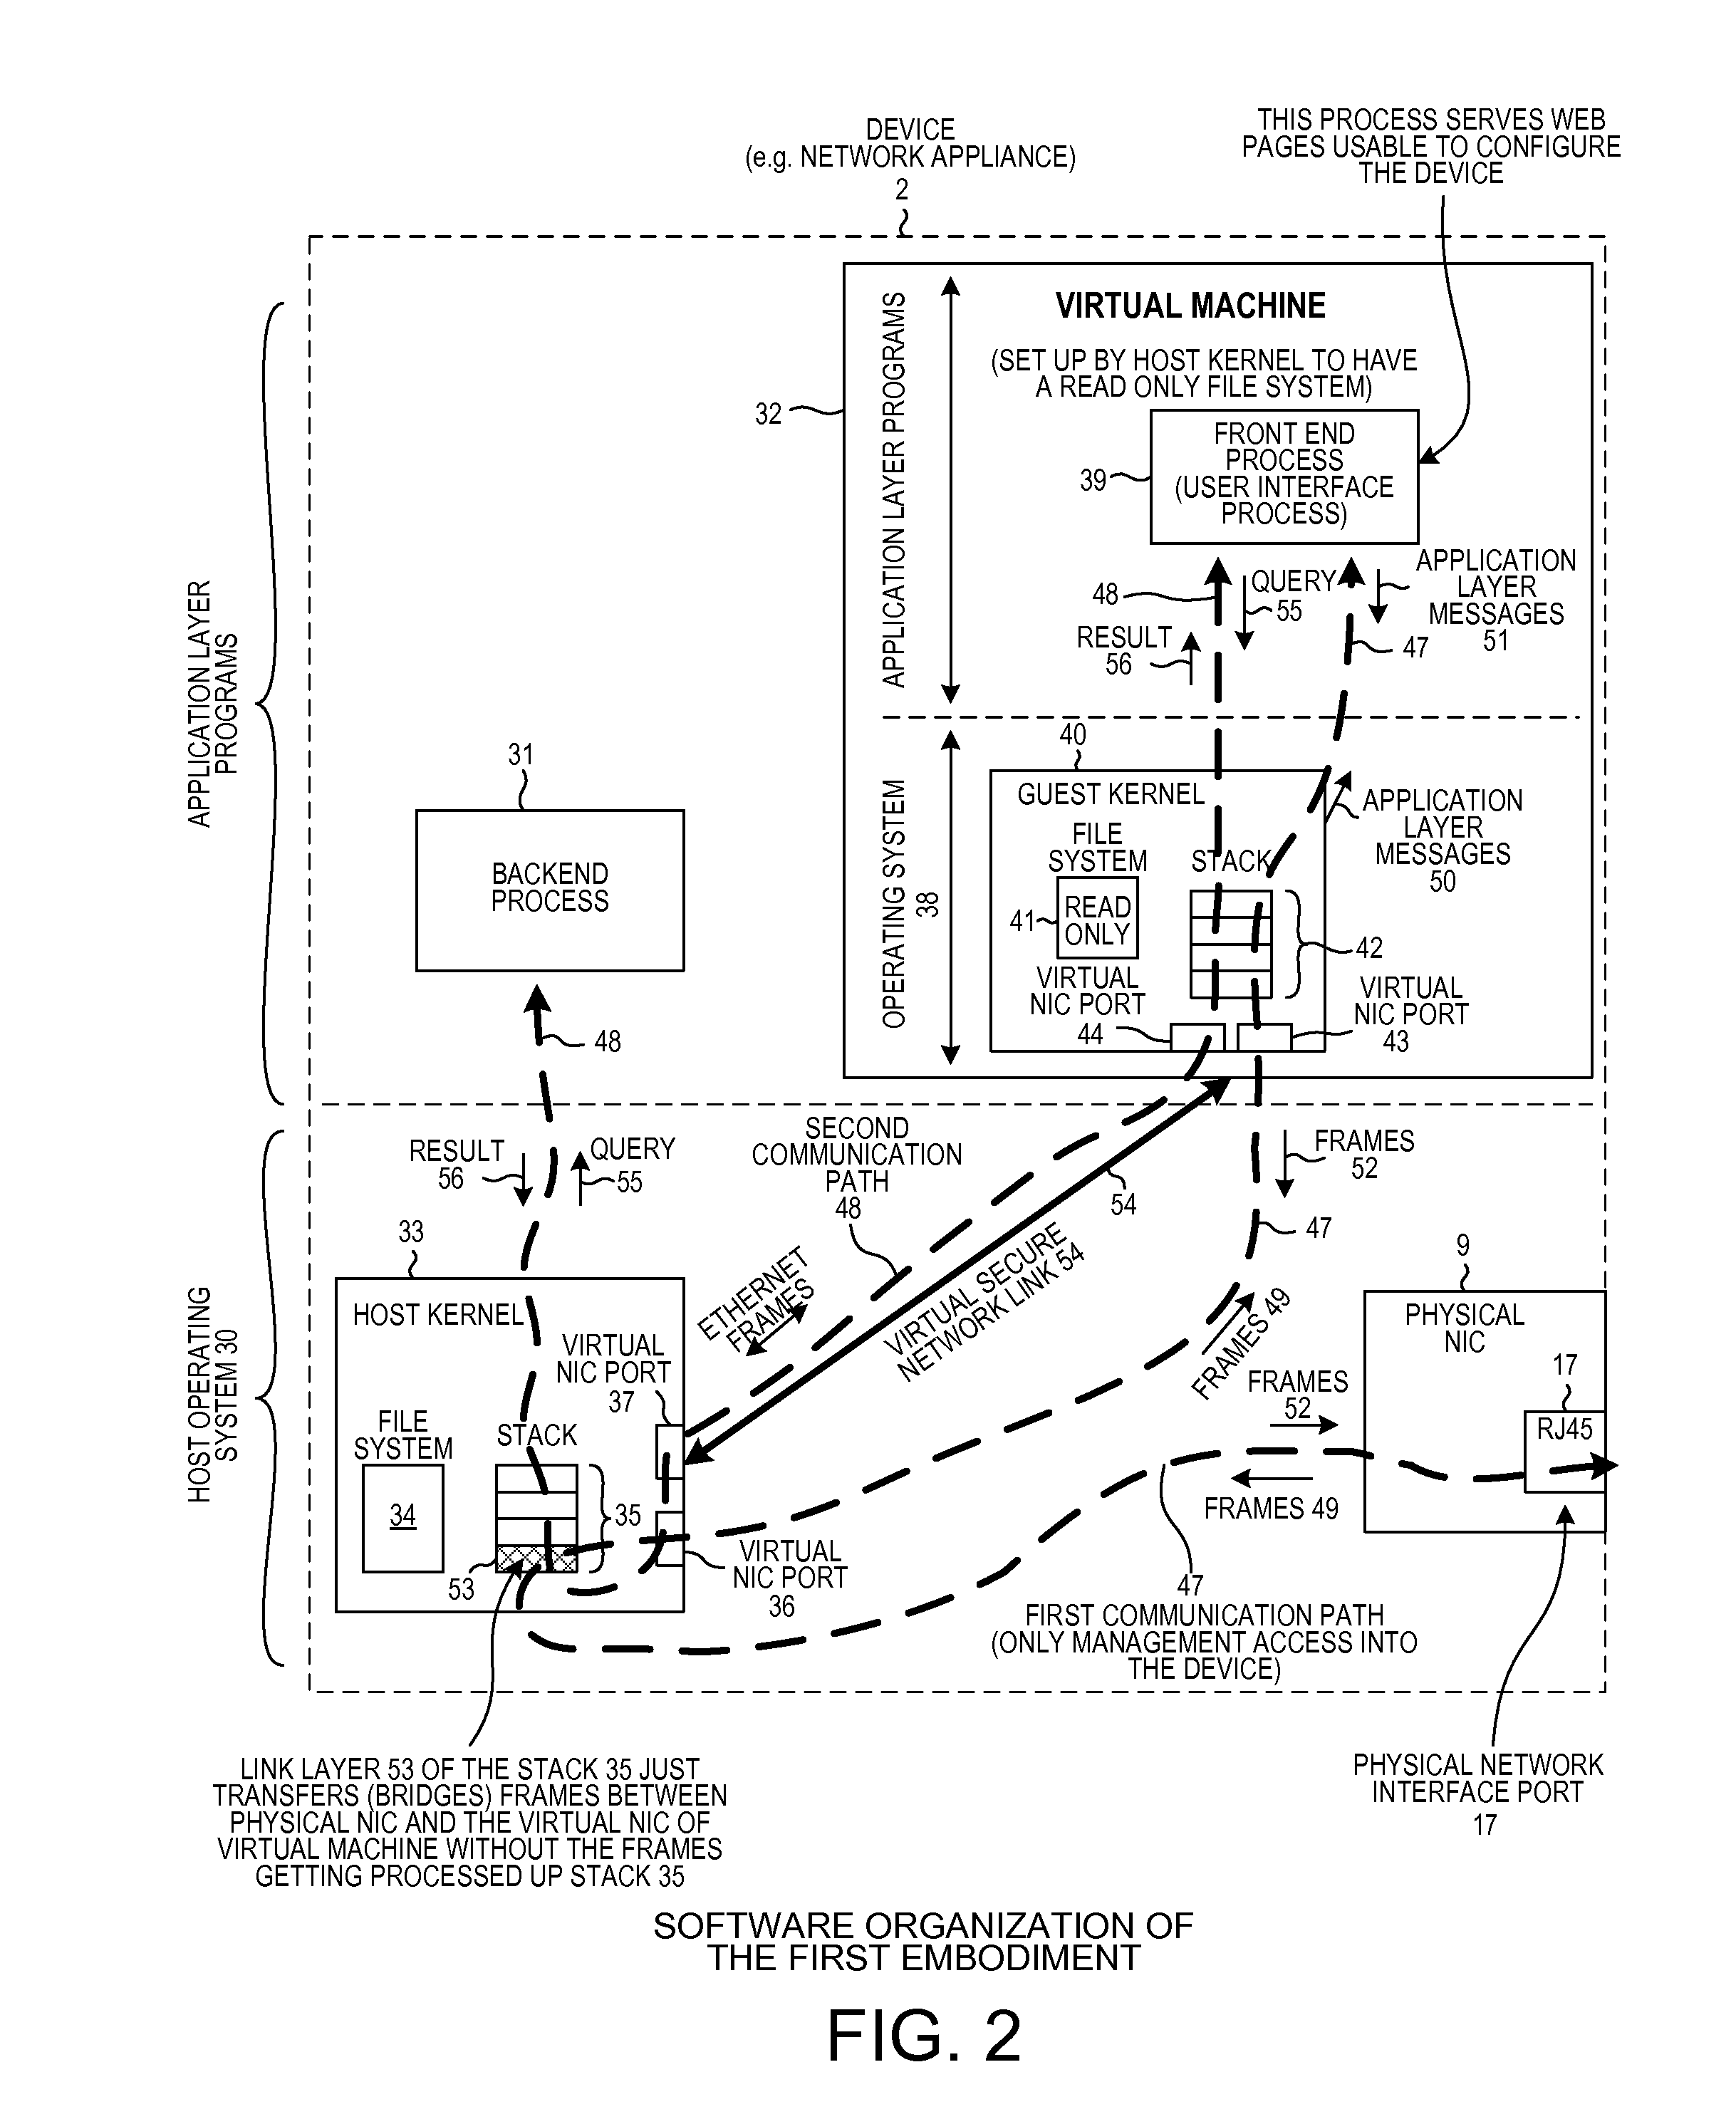 Compartmentalization of the user network interface to a device